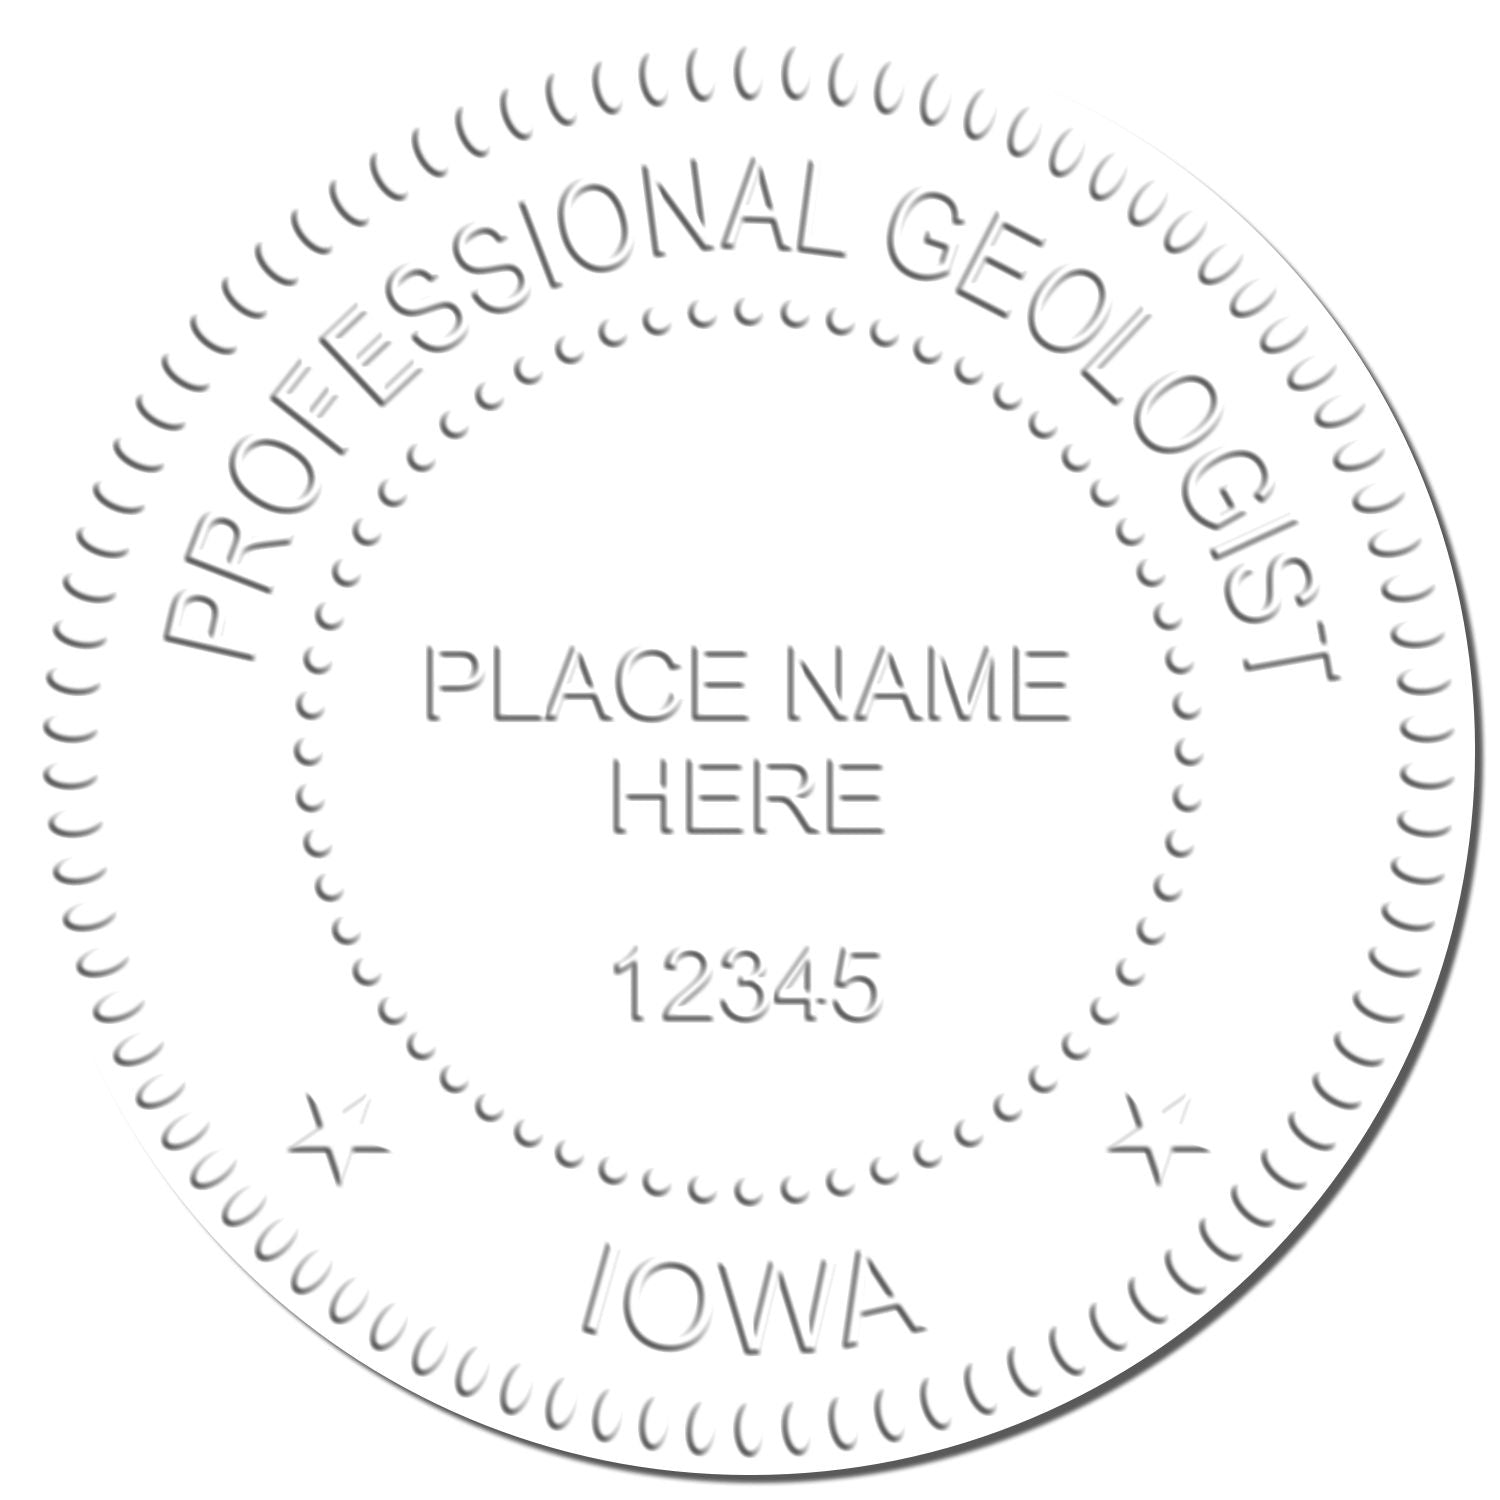 The main image for the Iowa Geologist Desk Seal depicting a sample of the imprint and imprint sample